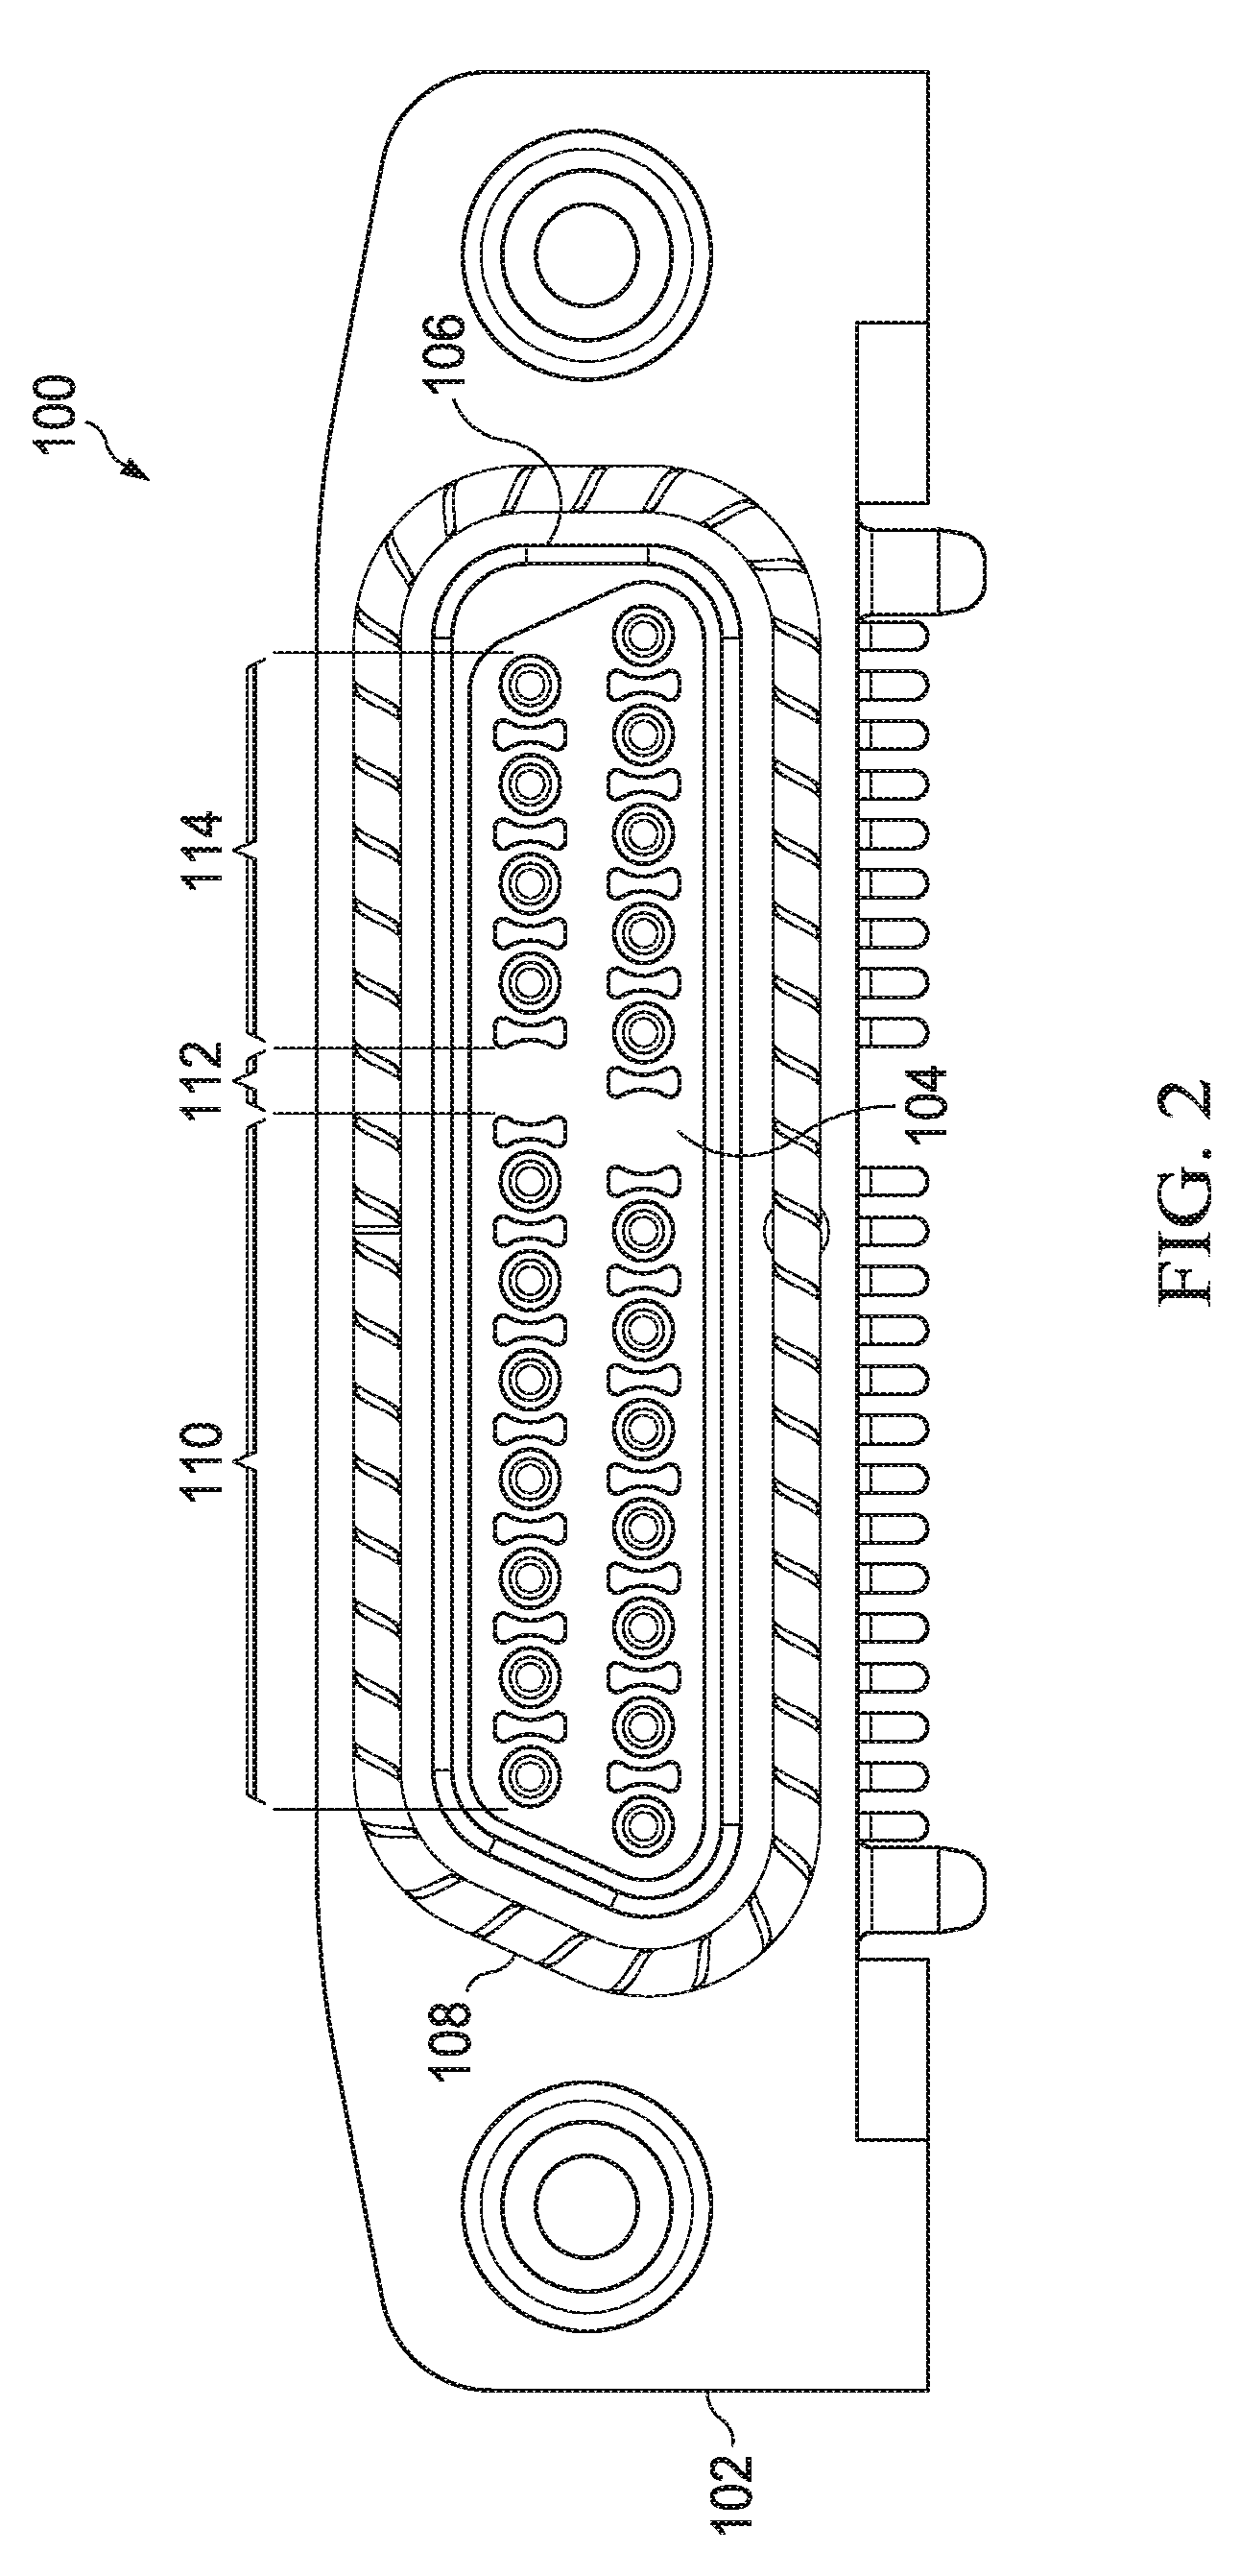 Insulator with air dielectric cavities for electrical connector